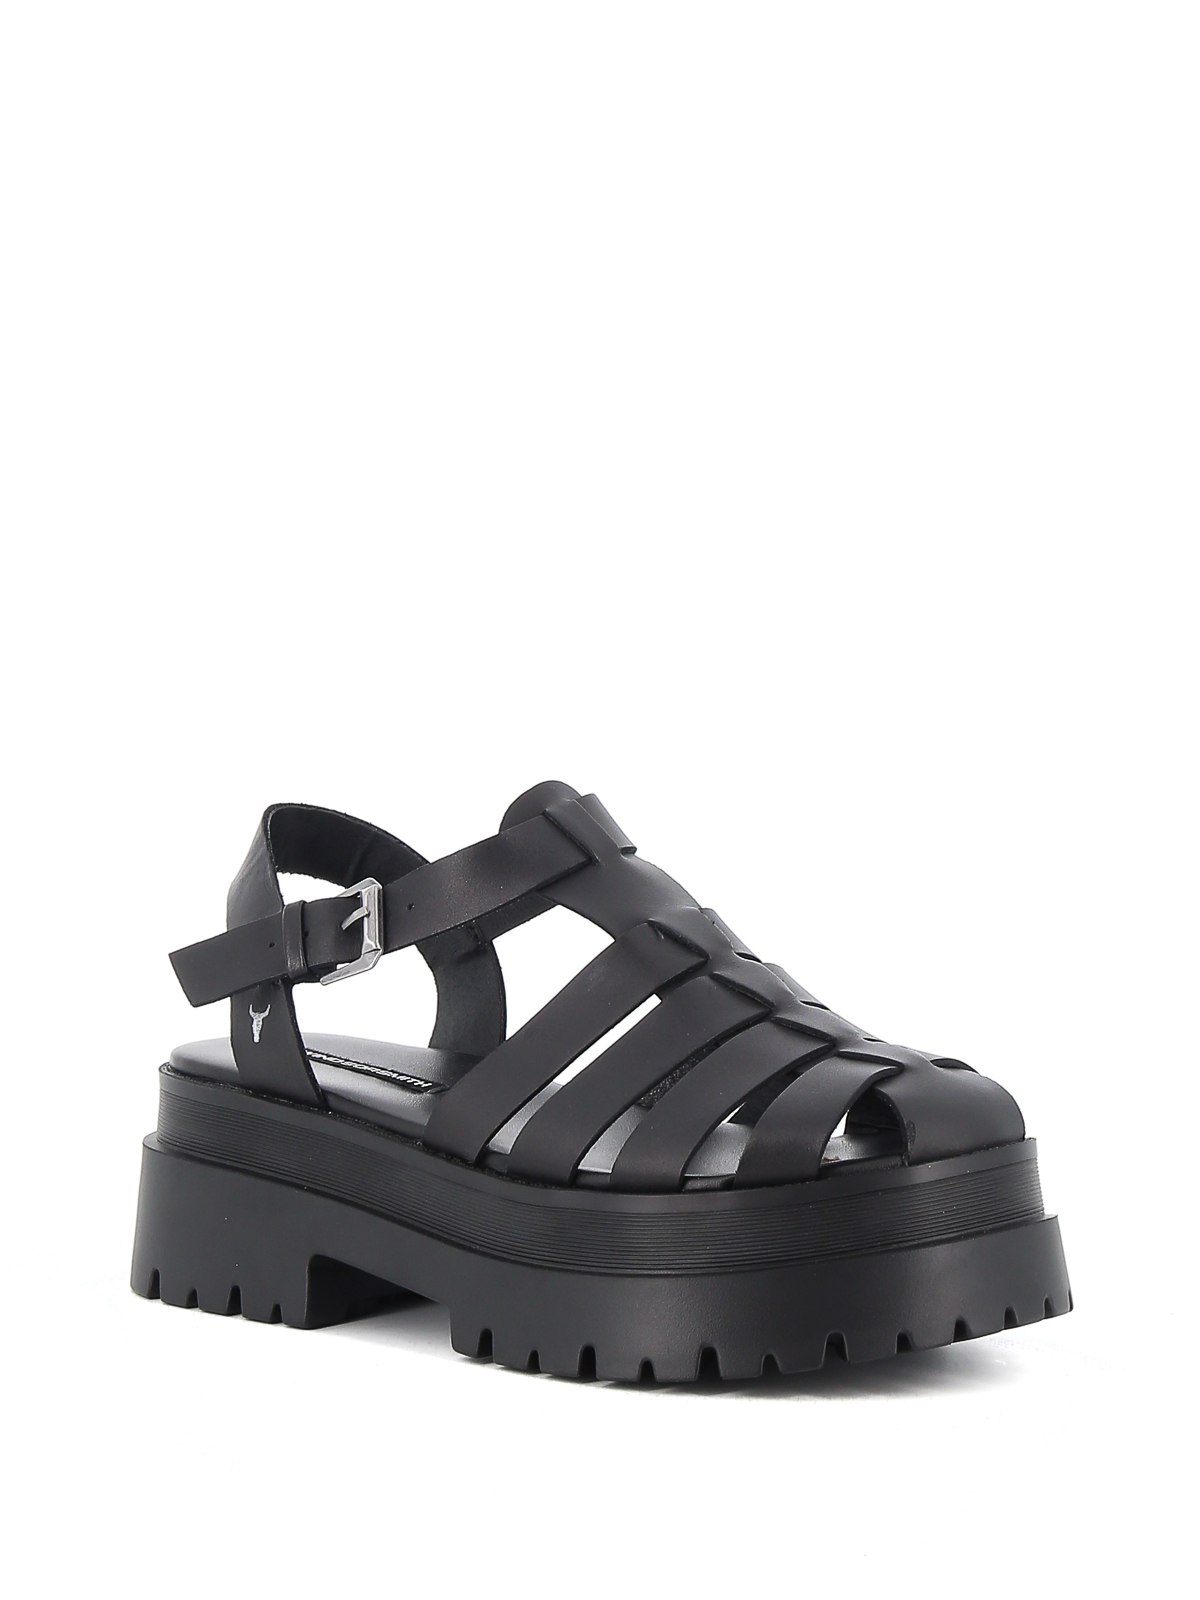 Sandals Windsor Smith - Twitch cage sandals - TWITCHLEATHERBLK | iKRIX.com